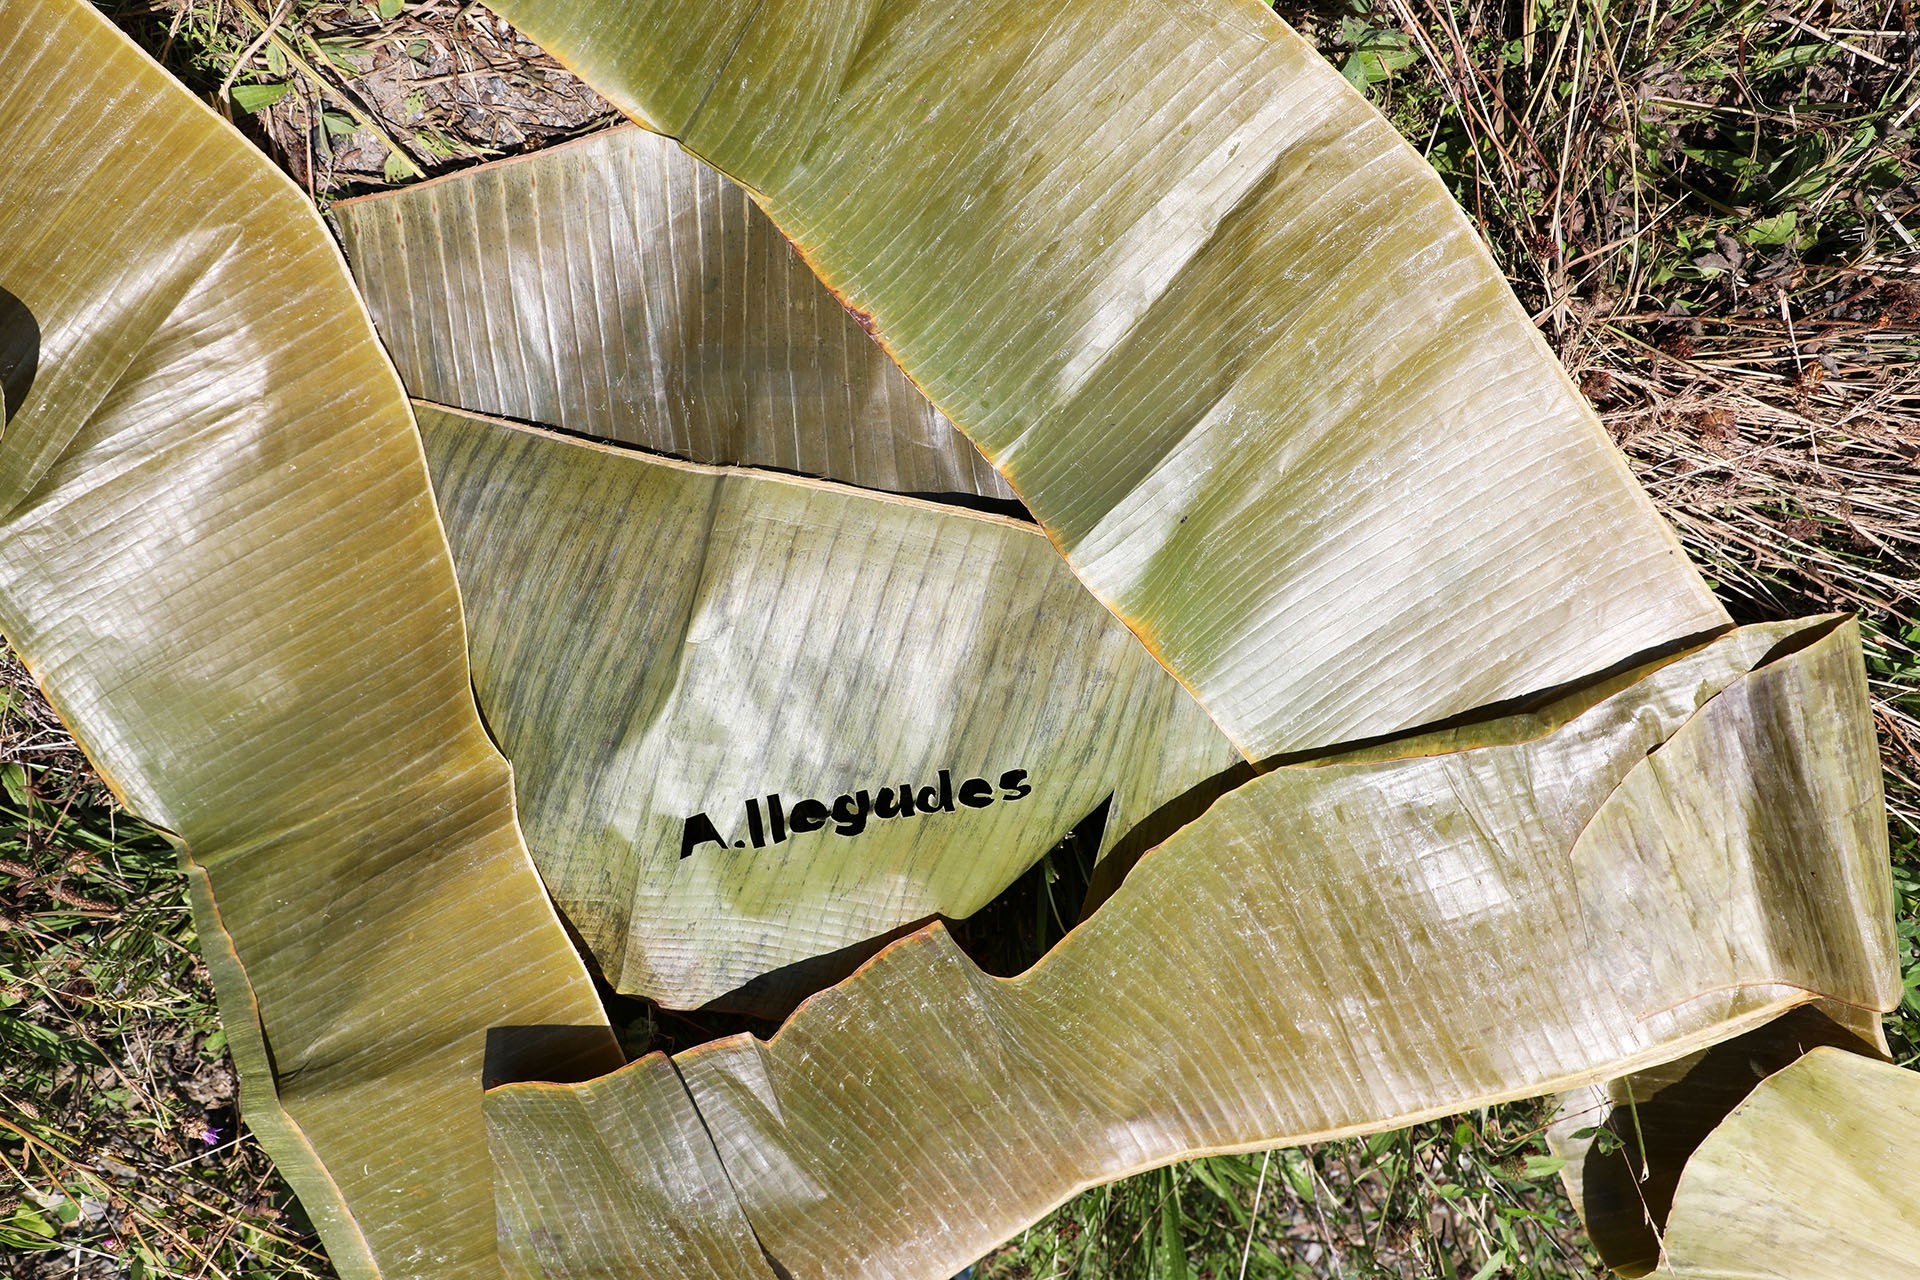 arrangement of plantain leaves, one of them has been laser cut with the exhibition title A.Ilegades  